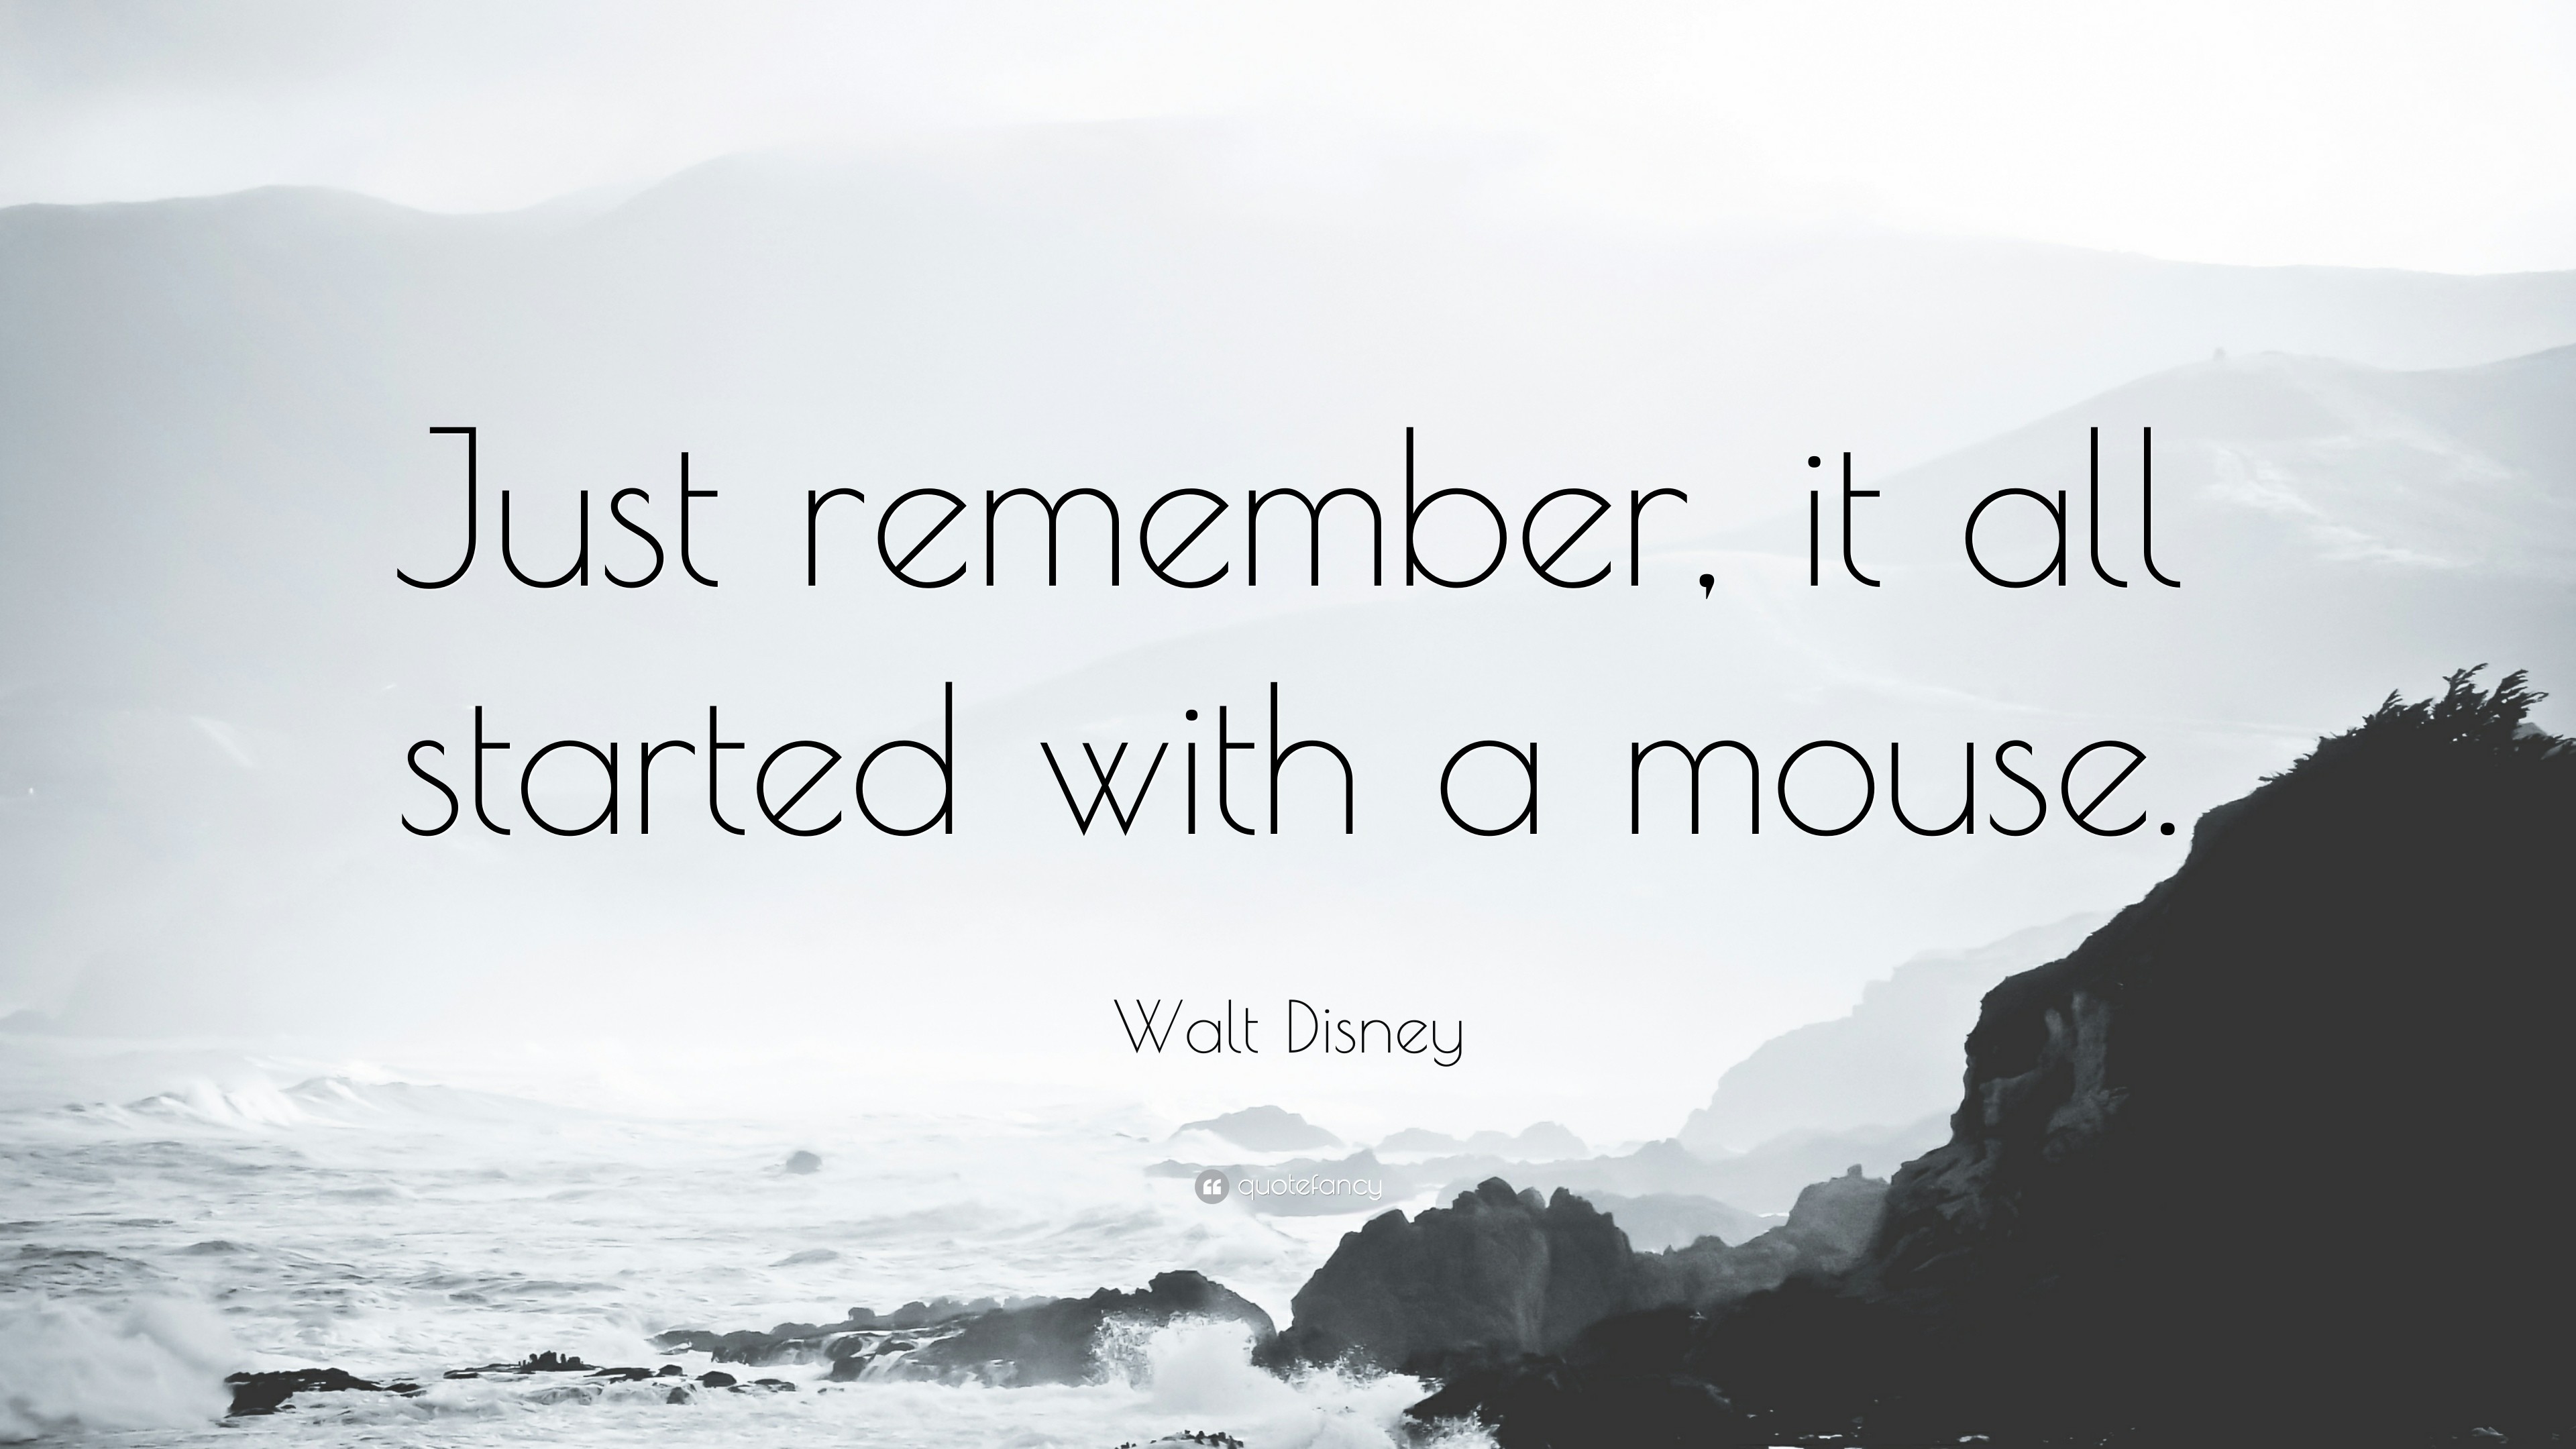 Walt Disney Quote Just remember, it all started with a mouse.